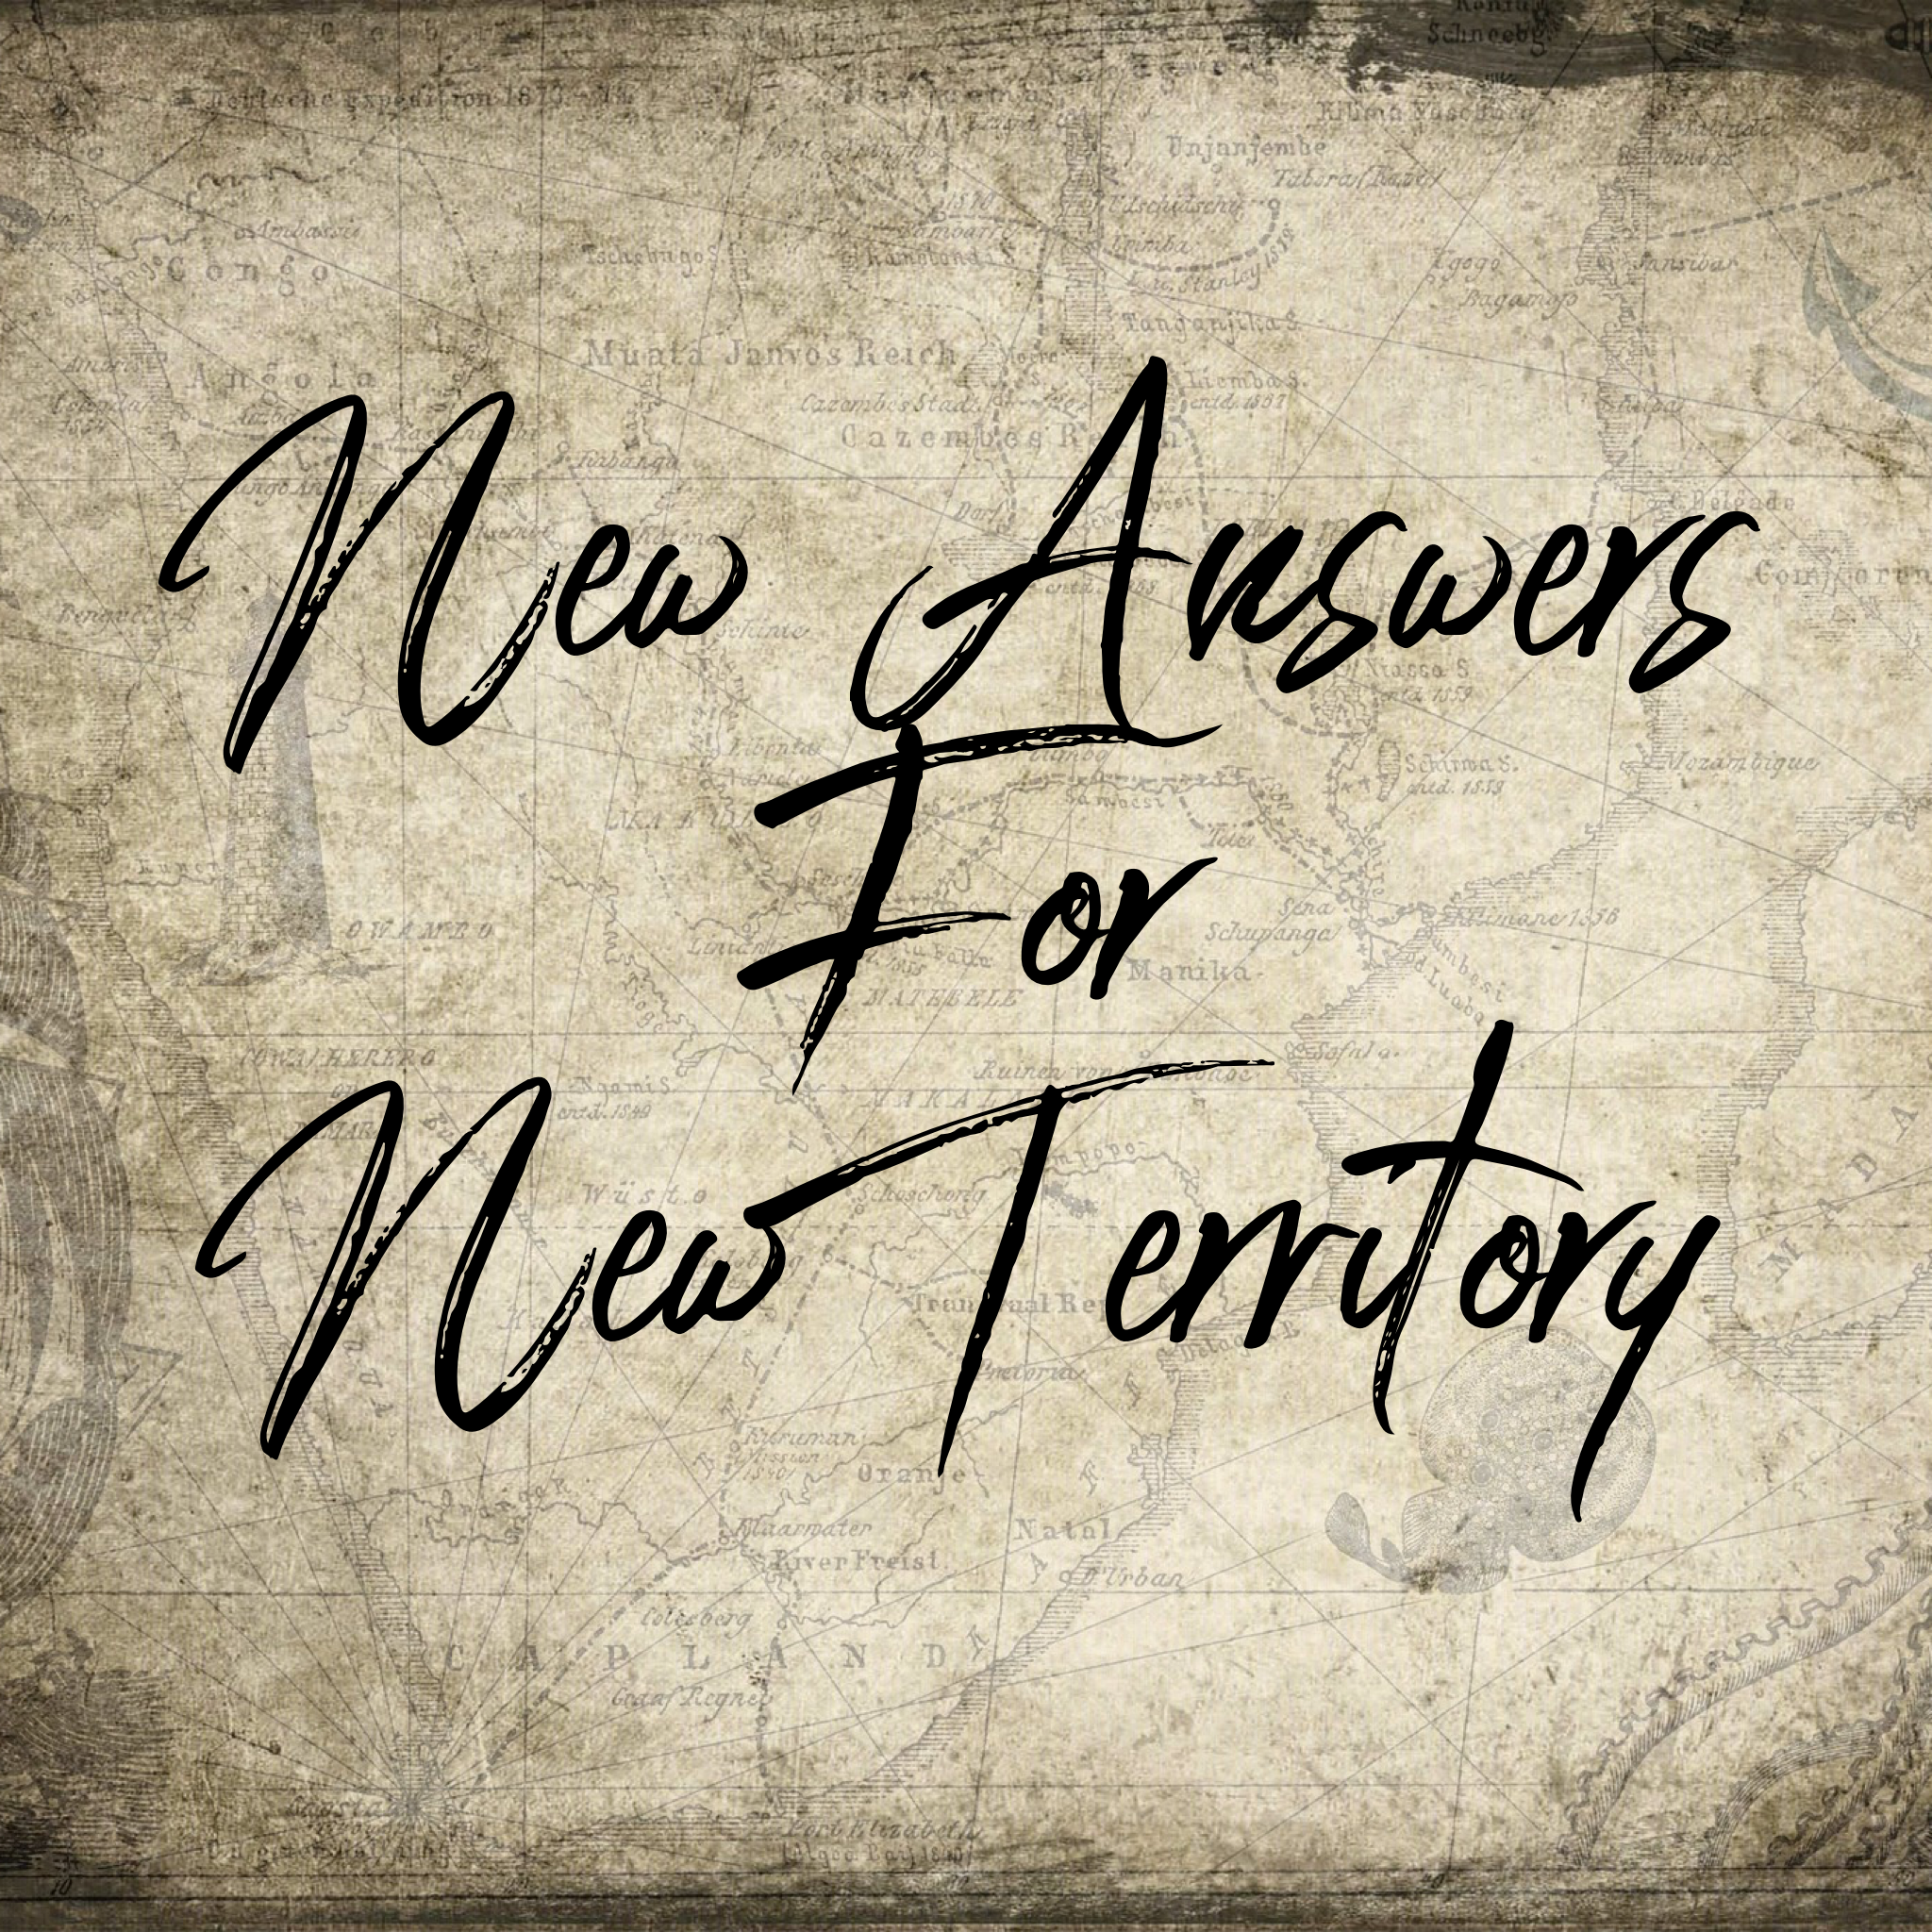 New Answers for New Territory - 10/2/18